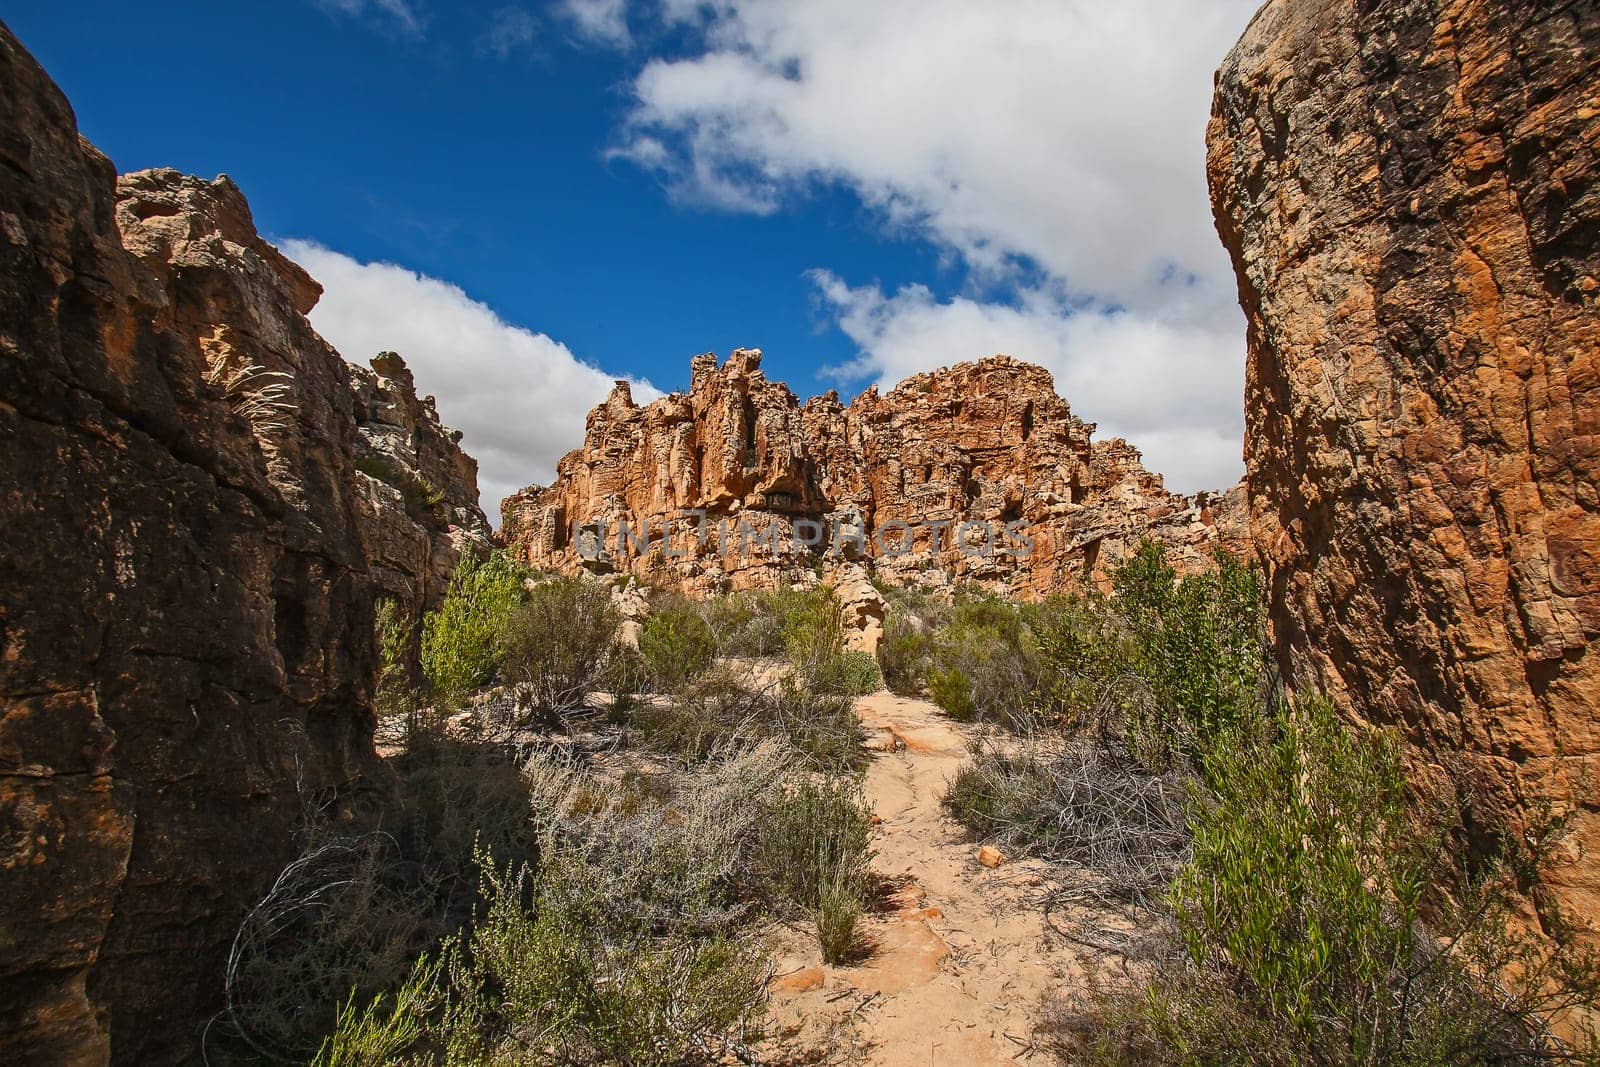 Cederberg Rock Formations 12818 by kobus_peche